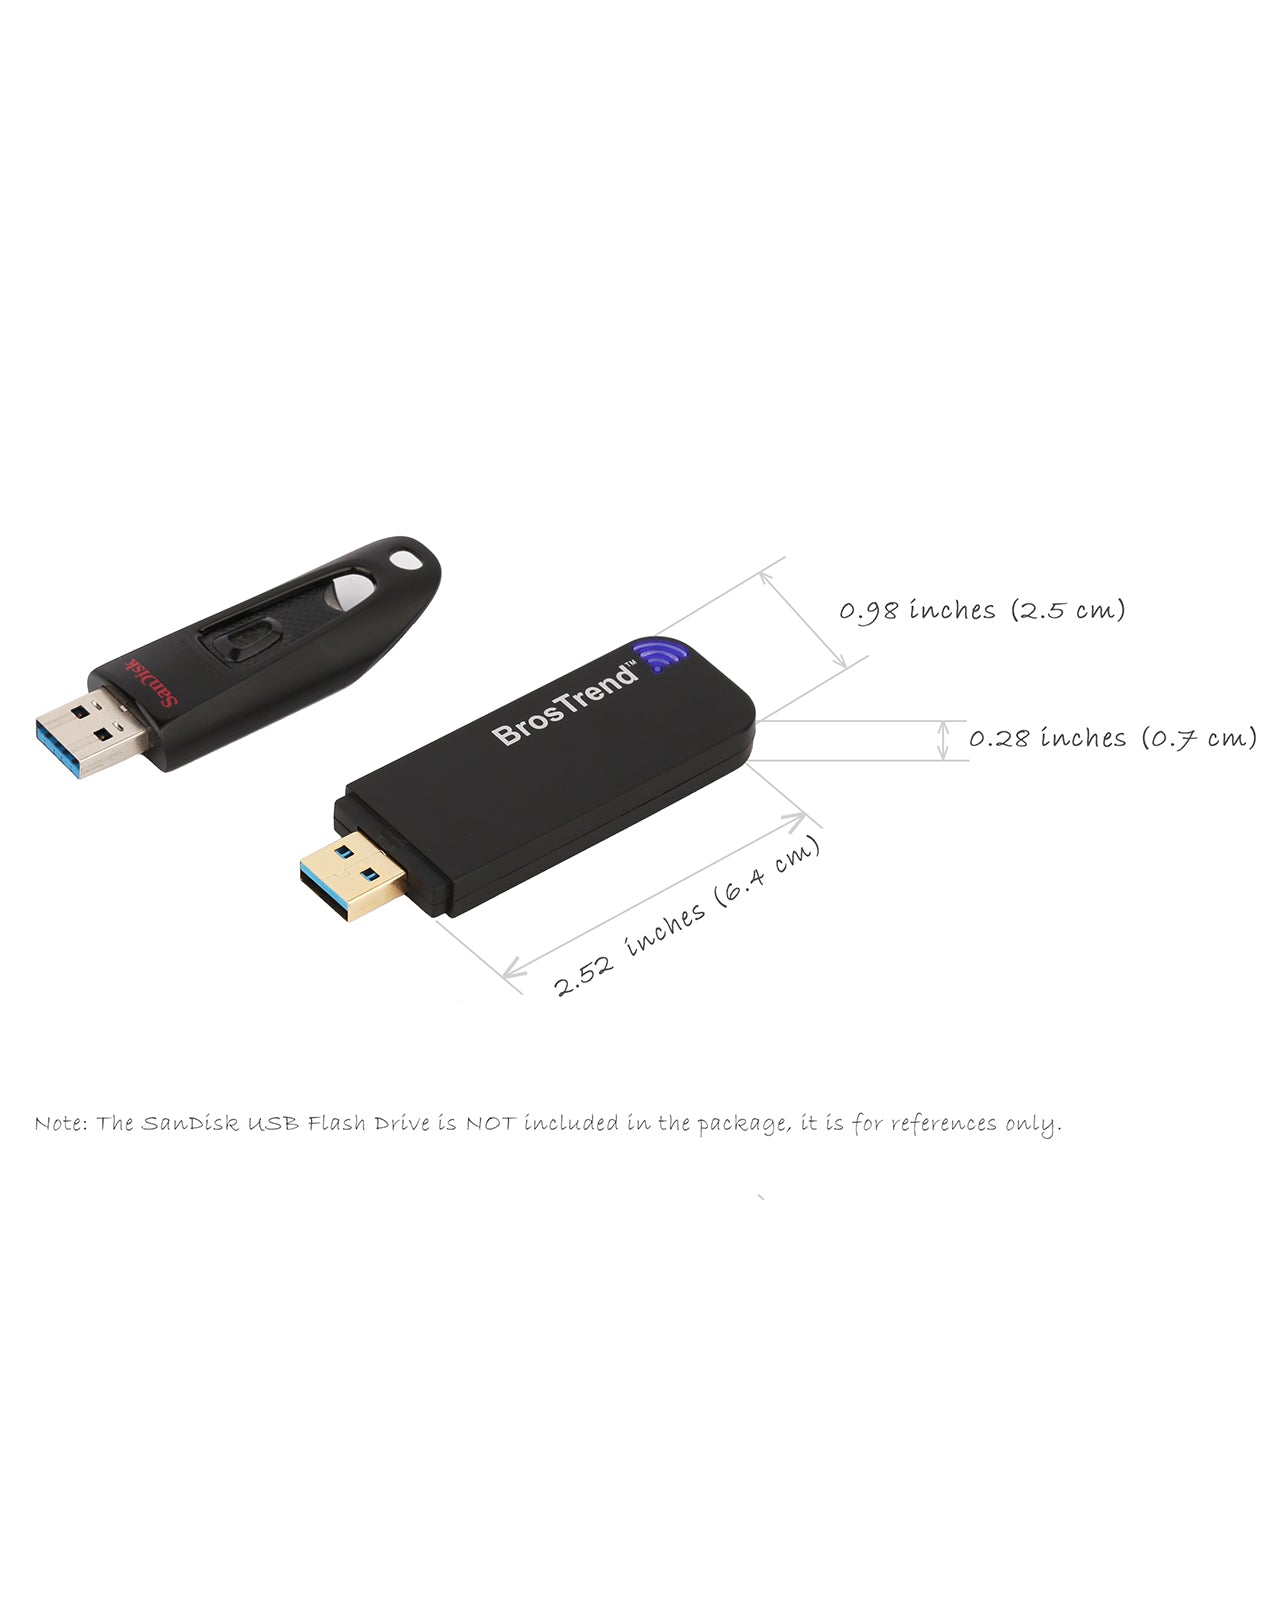 BrosTrend 1200Mbps USB WiFi Dongle For UK Market